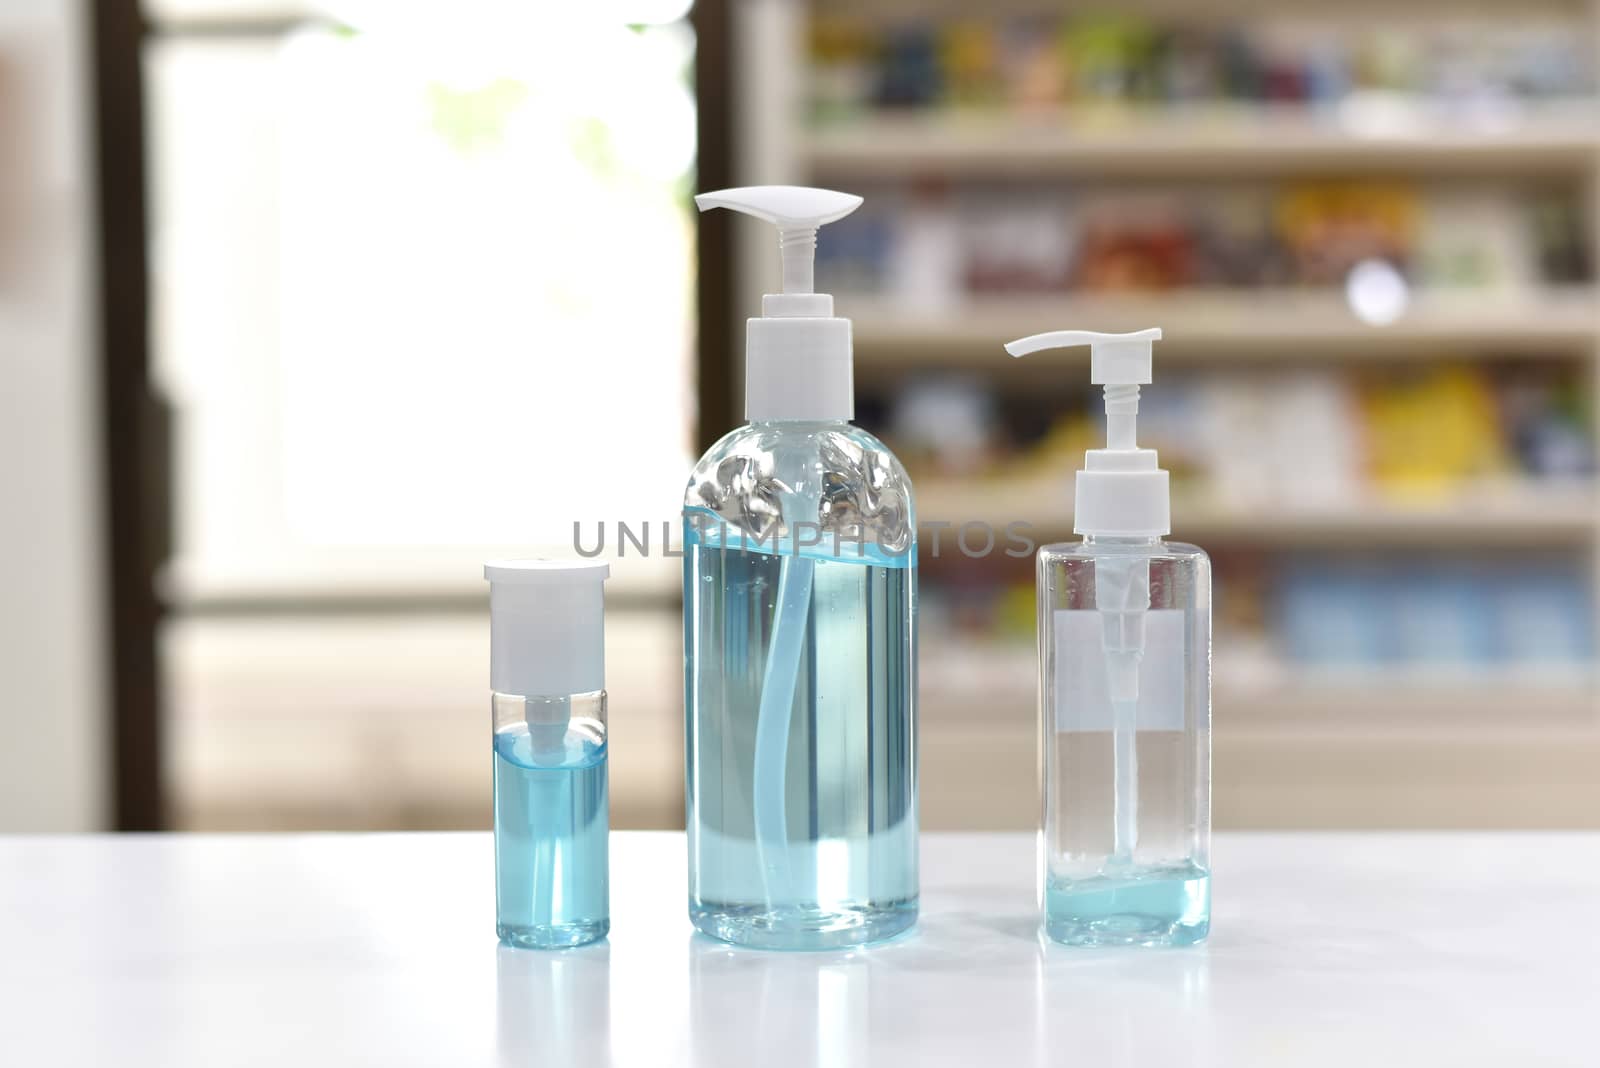 alcohol gel for hand wash. hand sanitizer gel for hygiene corona virus protection and medical. medicine bottles in blue tone People using alcohol gel to wash hands to prevent COVID-19 virus For office